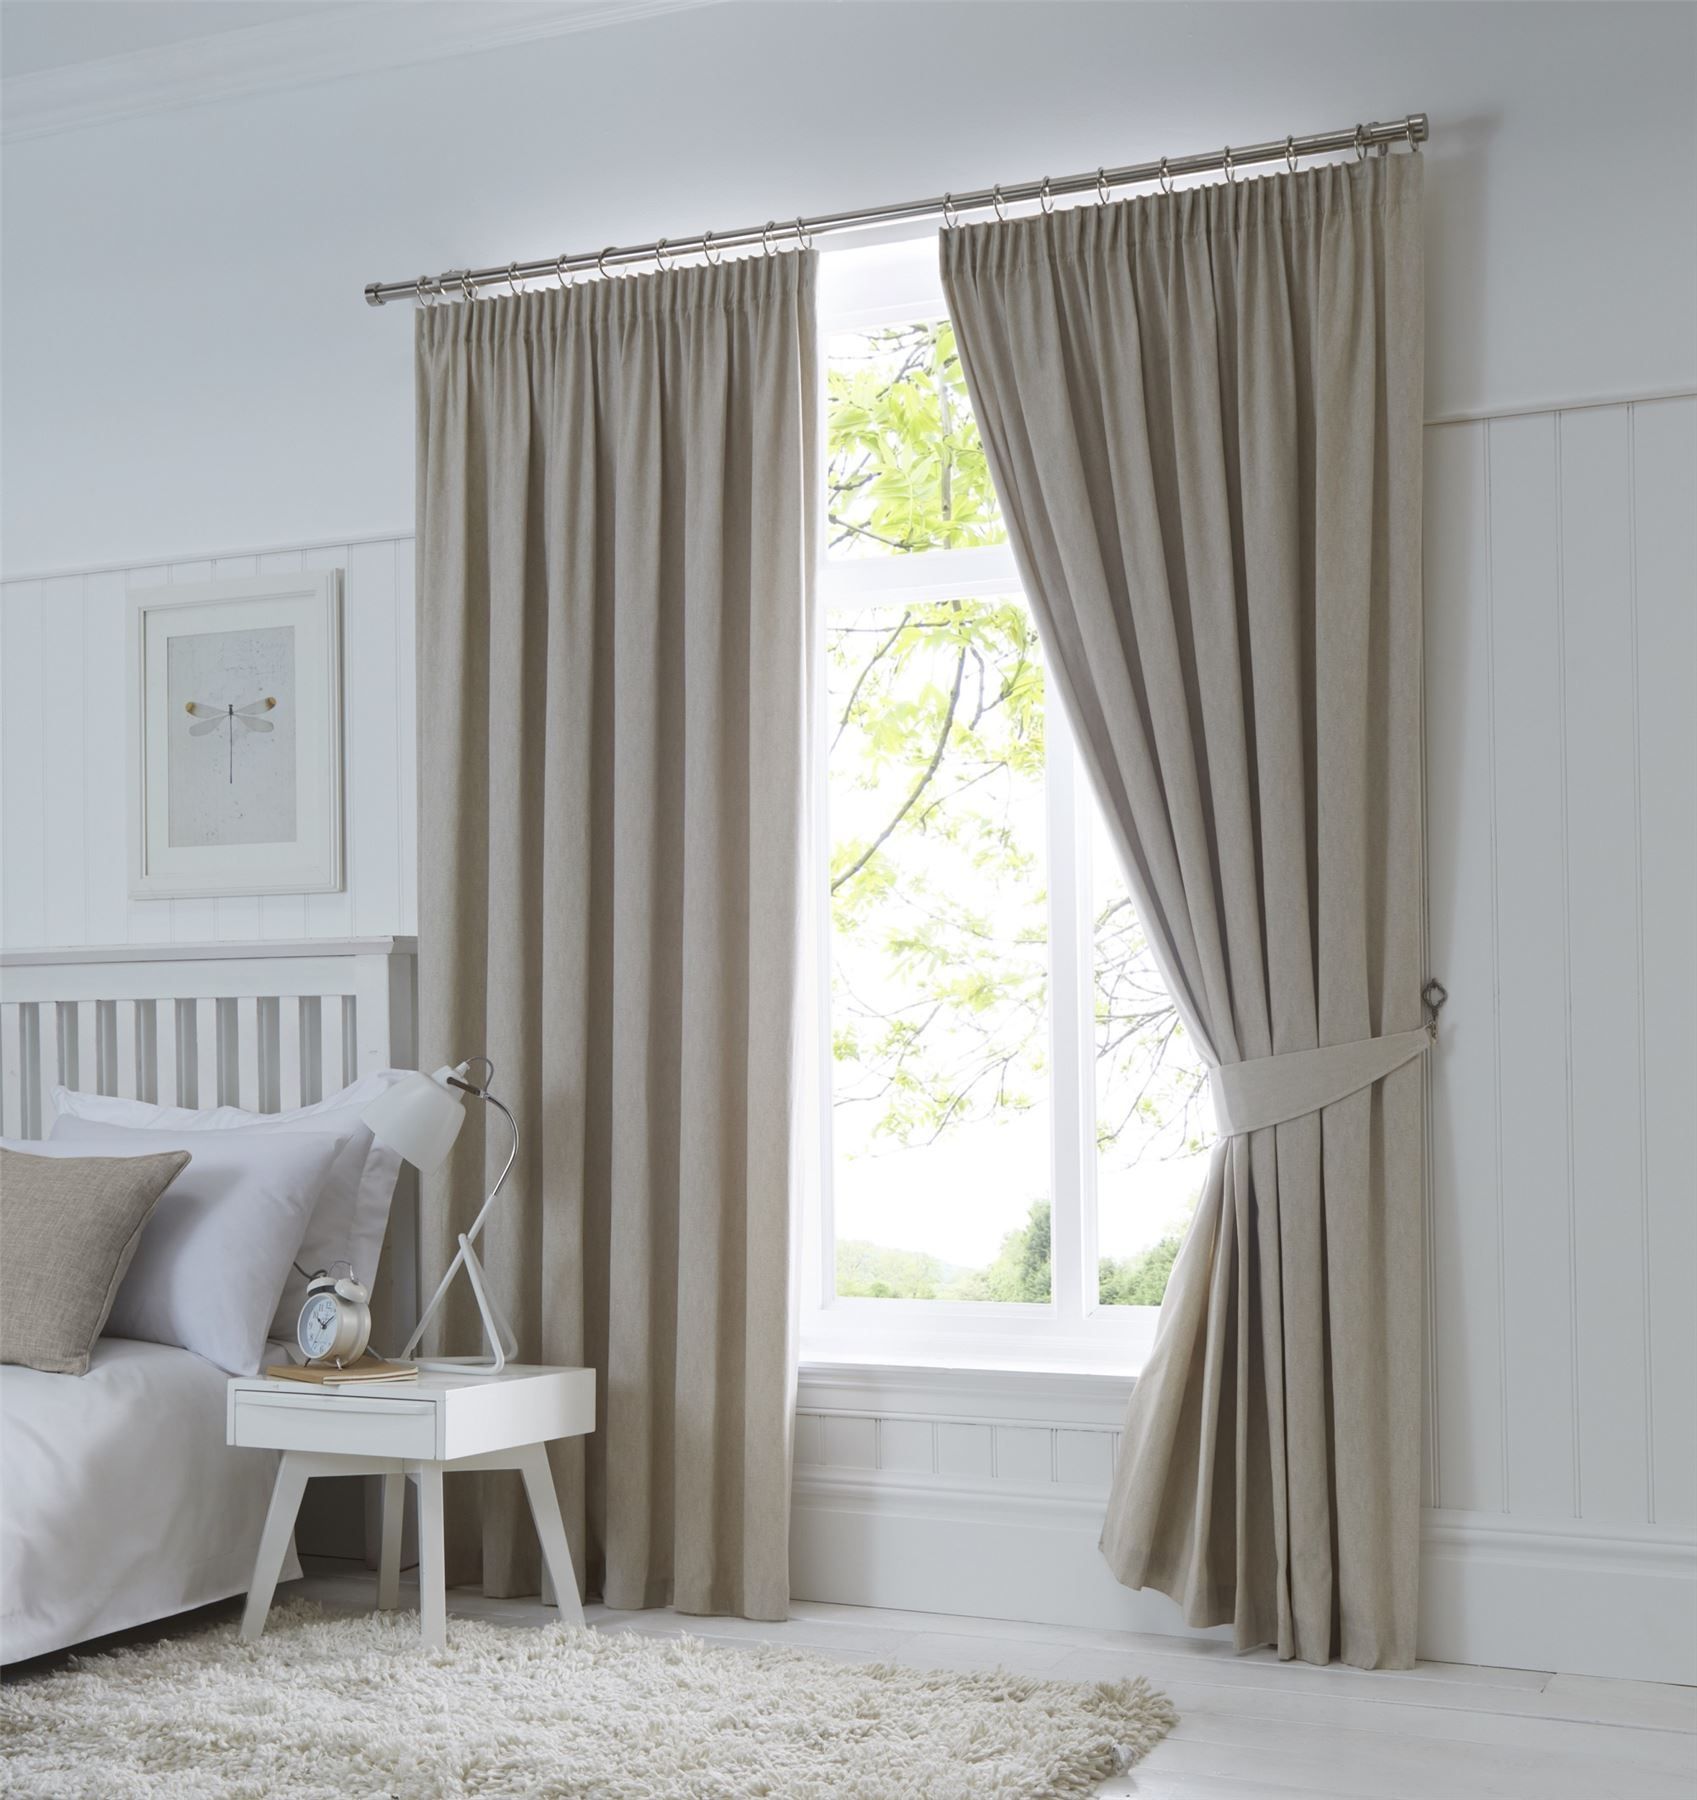 Darling Plain Blackout Curtains Ready Made Modern Pastel Shade Within Pencil Pleat Blackout Curtains (View 10 of 15)